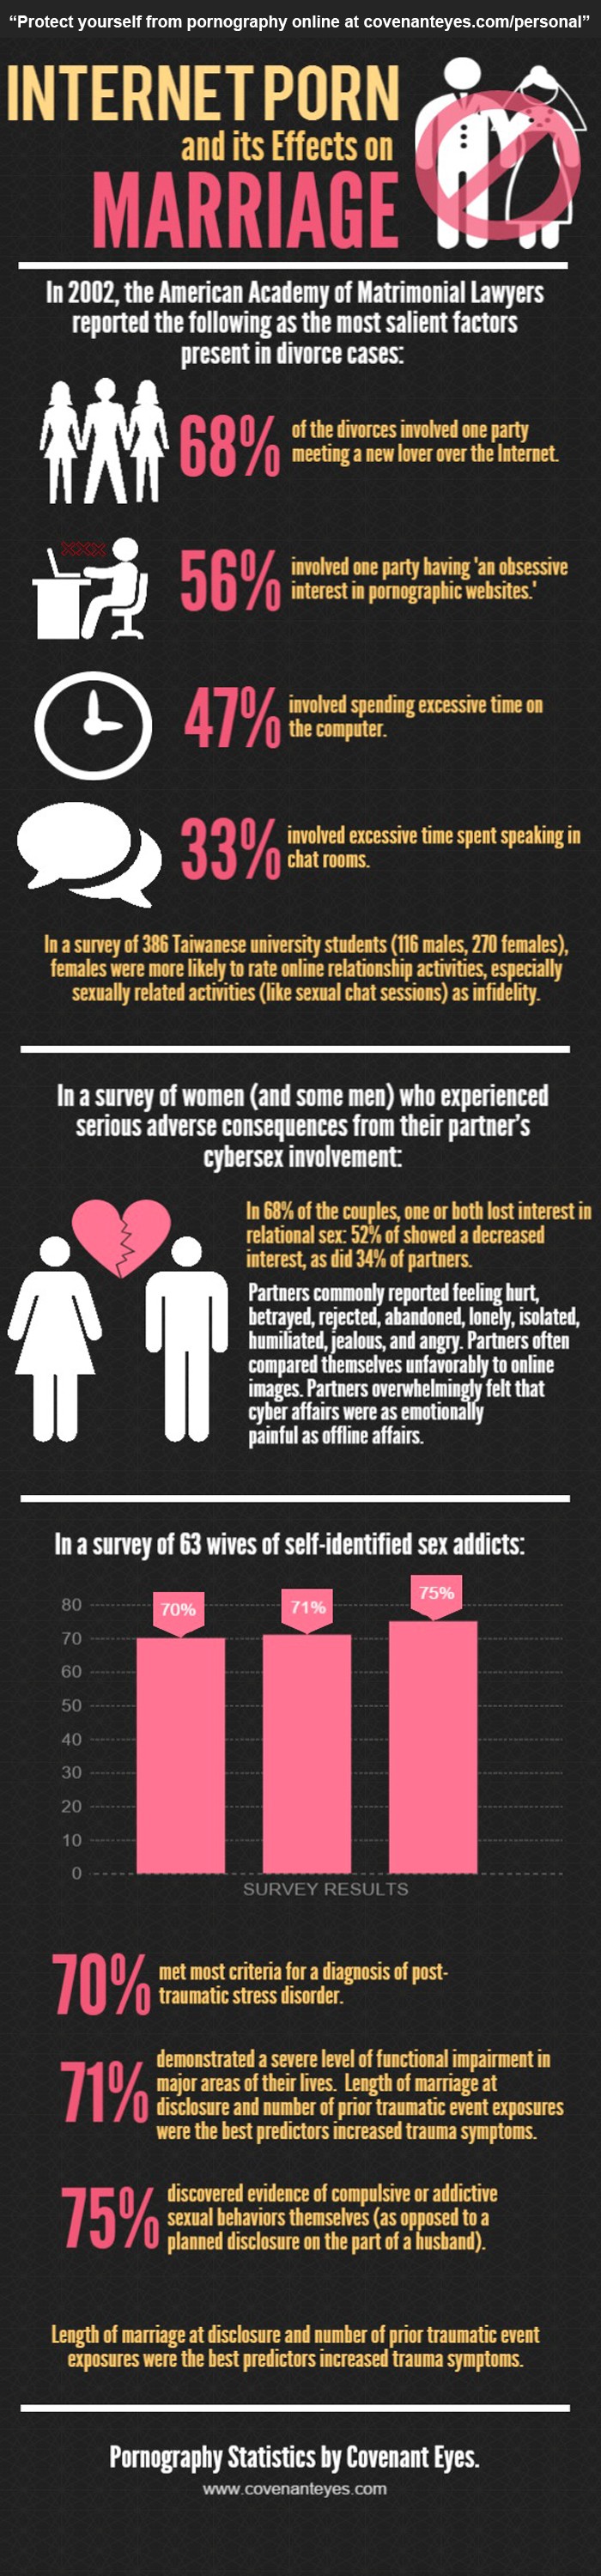 Internet Porn Addiction - Porn Addiction Problems: Effects on Marriage (Infographic)